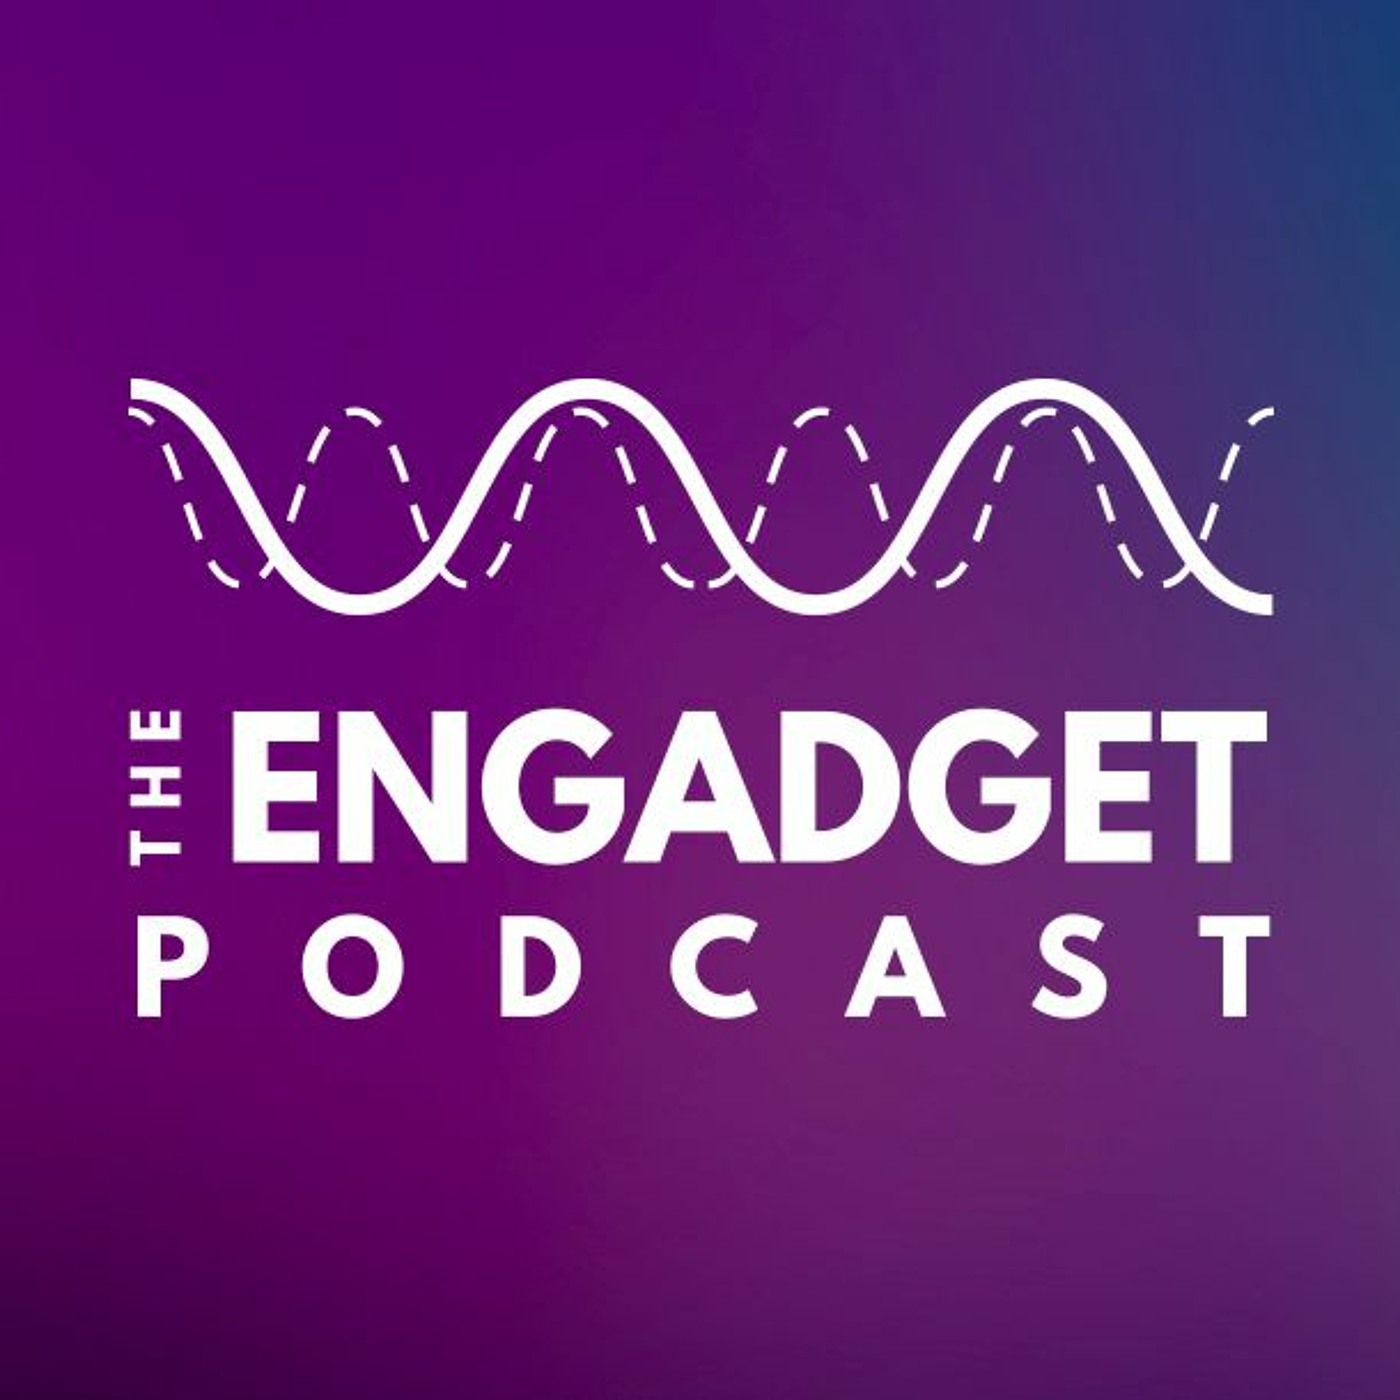 The Engadget Podcast Ep 8: He's Simple, He's Dumb, He's the Pilot